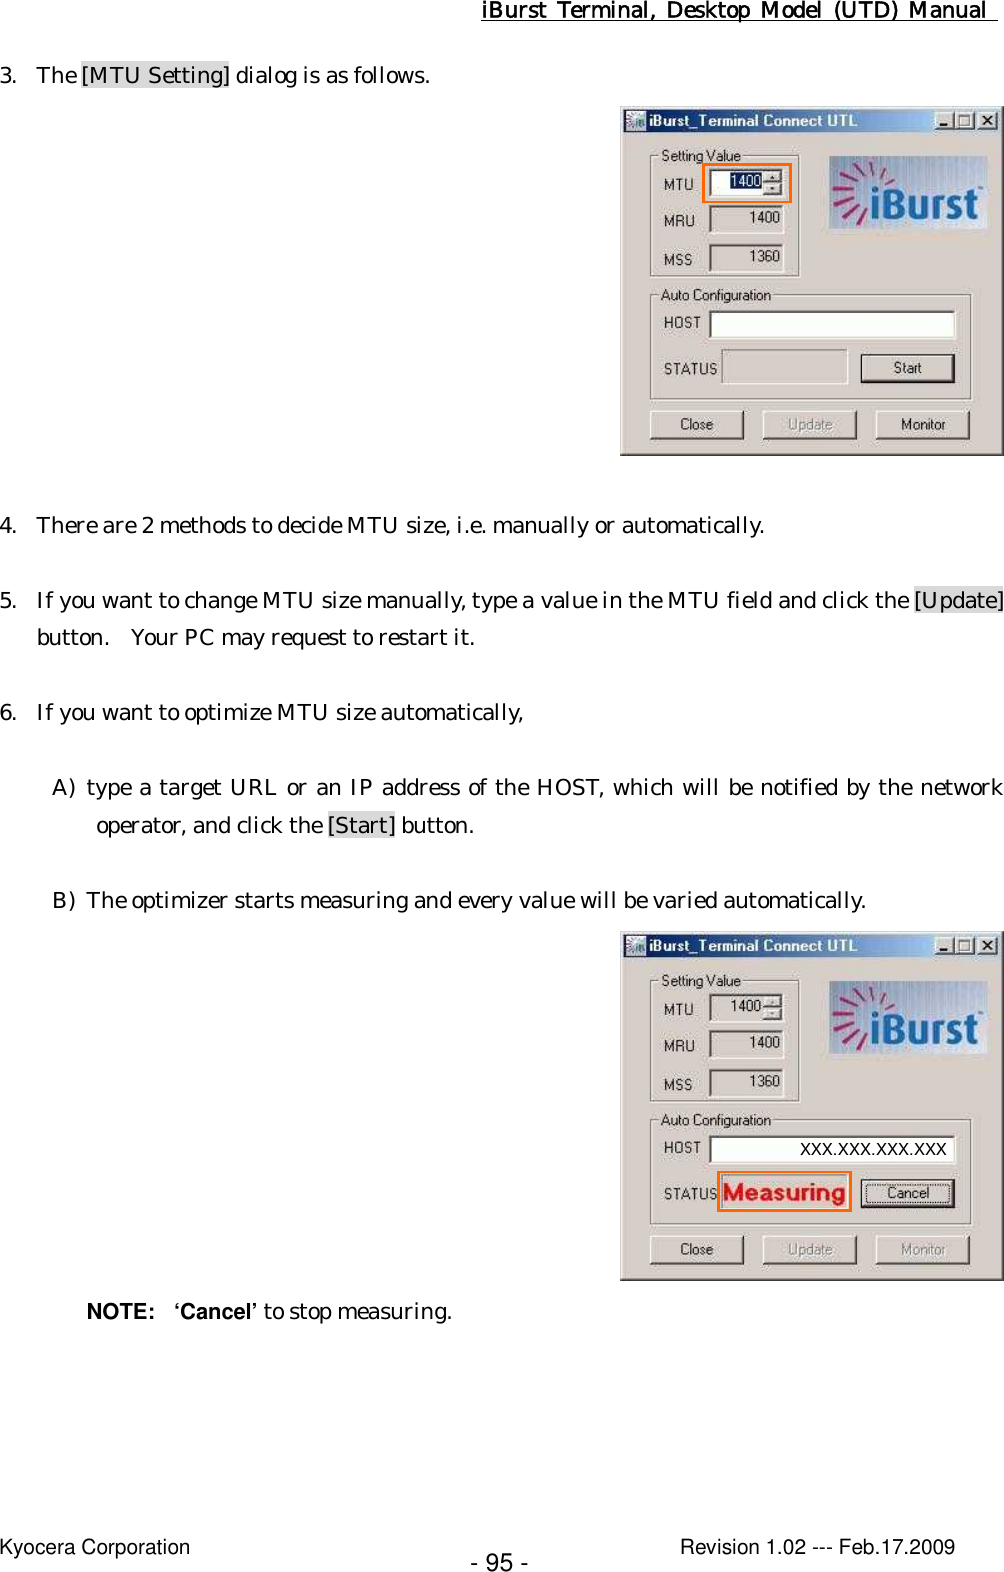 iBurst  Terminal, Desktop  Model  (UTD)  Manual    Kyocera Corporation                                                                                              Revision 1.02 --- Feb.17.2009 - 95 - 3. The [MTU Setting] dialog is as follows.   4. There are 2 methods to decide MTU size, i.e. manually or automatically.  5. If you want to change MTU size manually, type a value in the MTU field and click the [Update] button.  Your PC may request to restart it.  6. If you want to optimize MTU size automatically,  A) type a target URL or an IP address of the HOST, which will be notified by the network operator, and click the [Start] button.  B) The optimizer starts measuring and every value will be varied automatically.  NOTE:  ‘Cancel’ to stop measuring.  XXX.XXX.XXX.XXX 